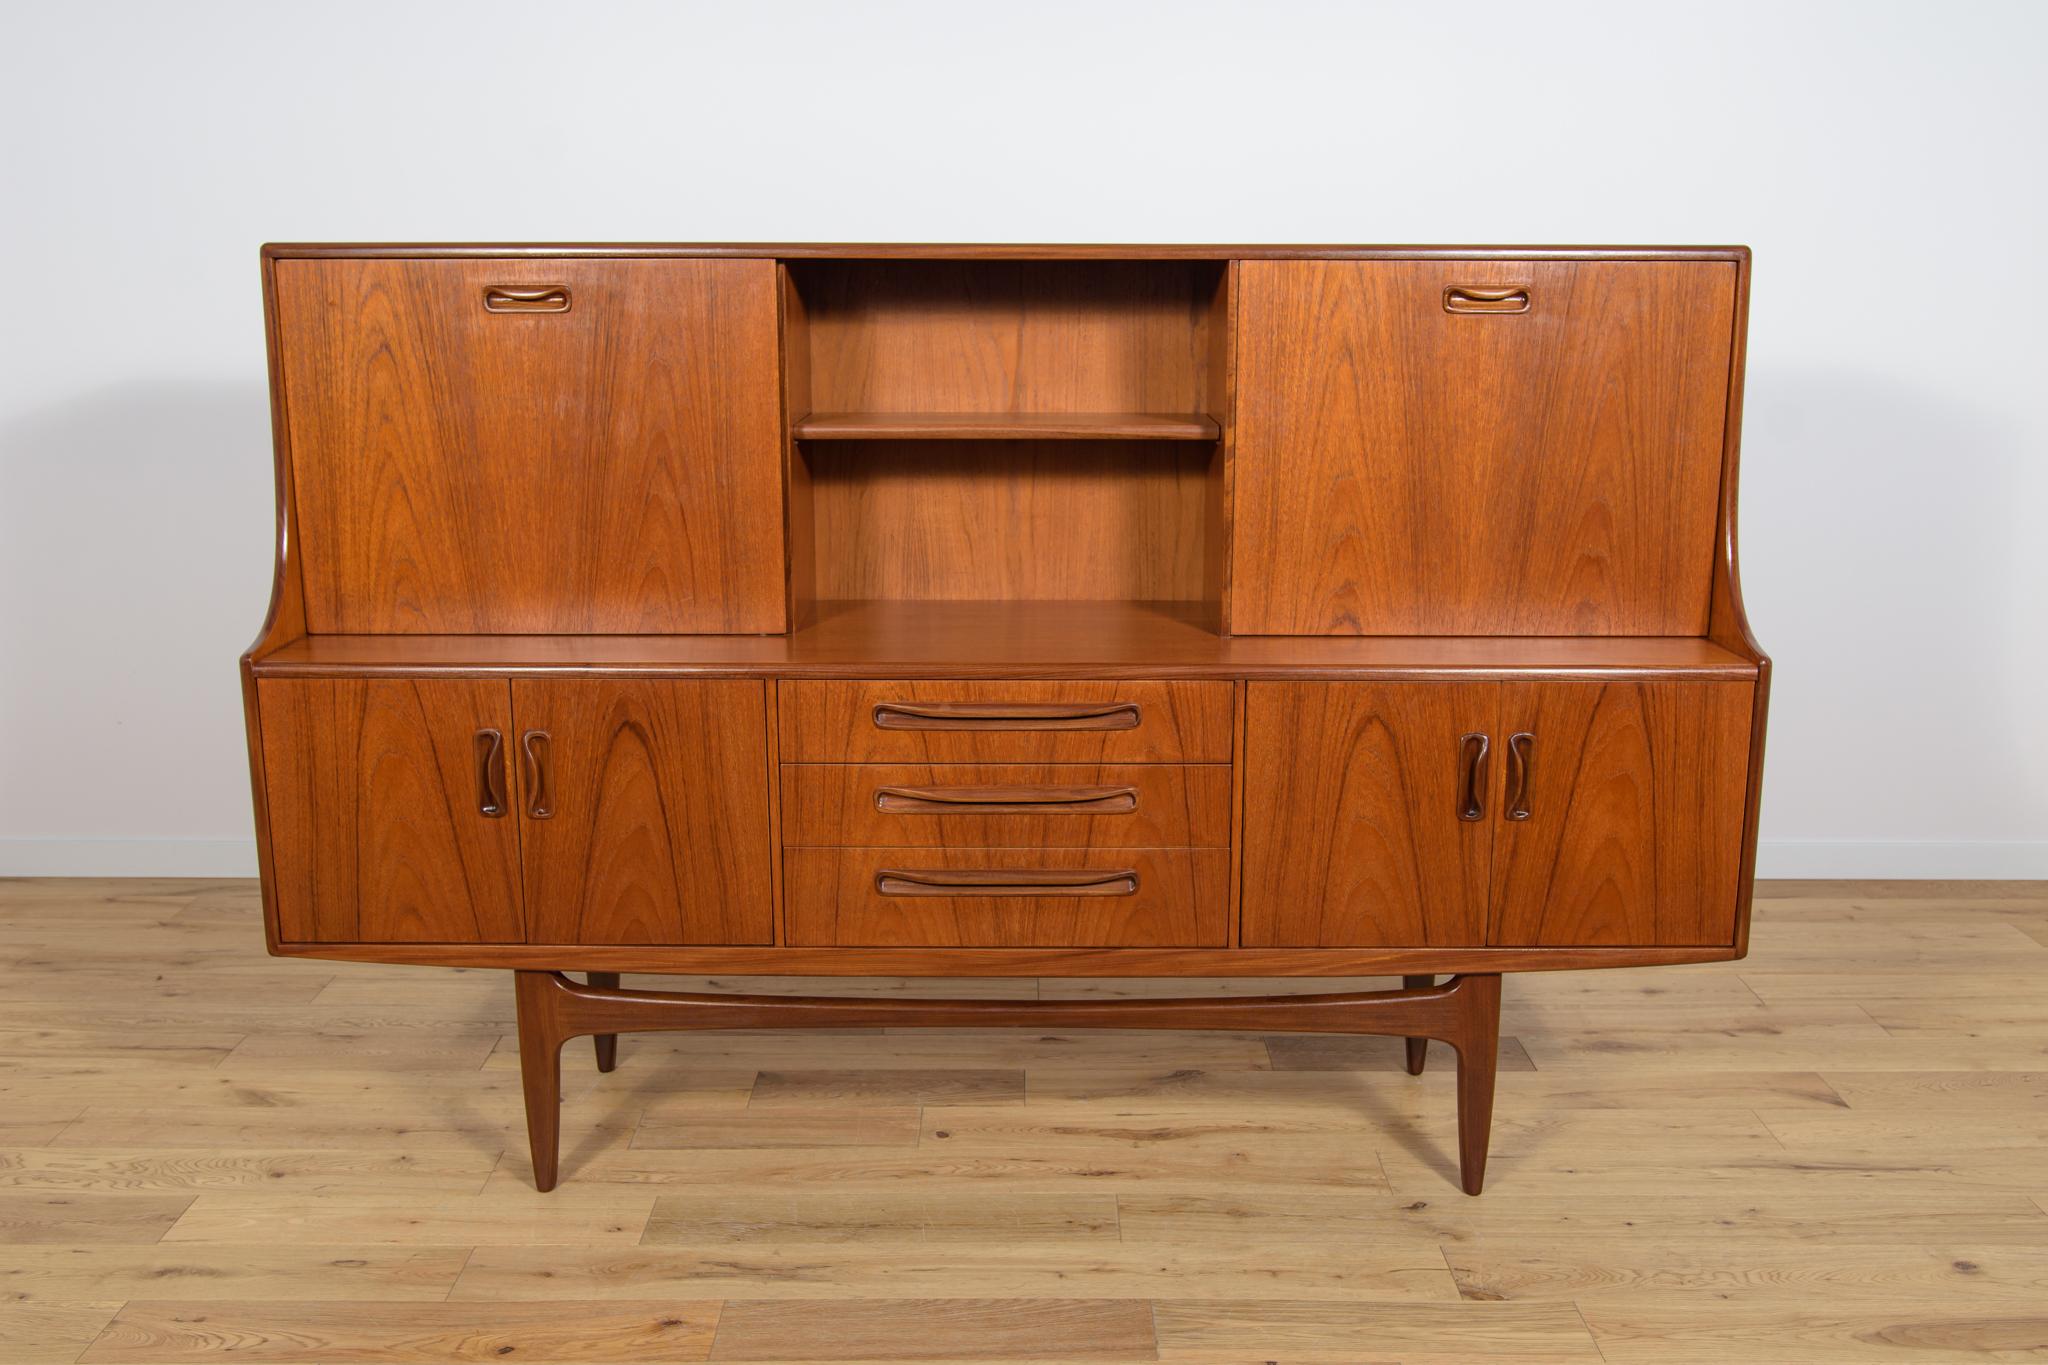 Tall sideboard of drawers designed by Victor Wilkins for the British manufacturer G-Plan in Great Britain in the 1960s. The chest of drawers is made of teak wood with contoured solid handles. The whole is after a comprehensive carpentry renovation.